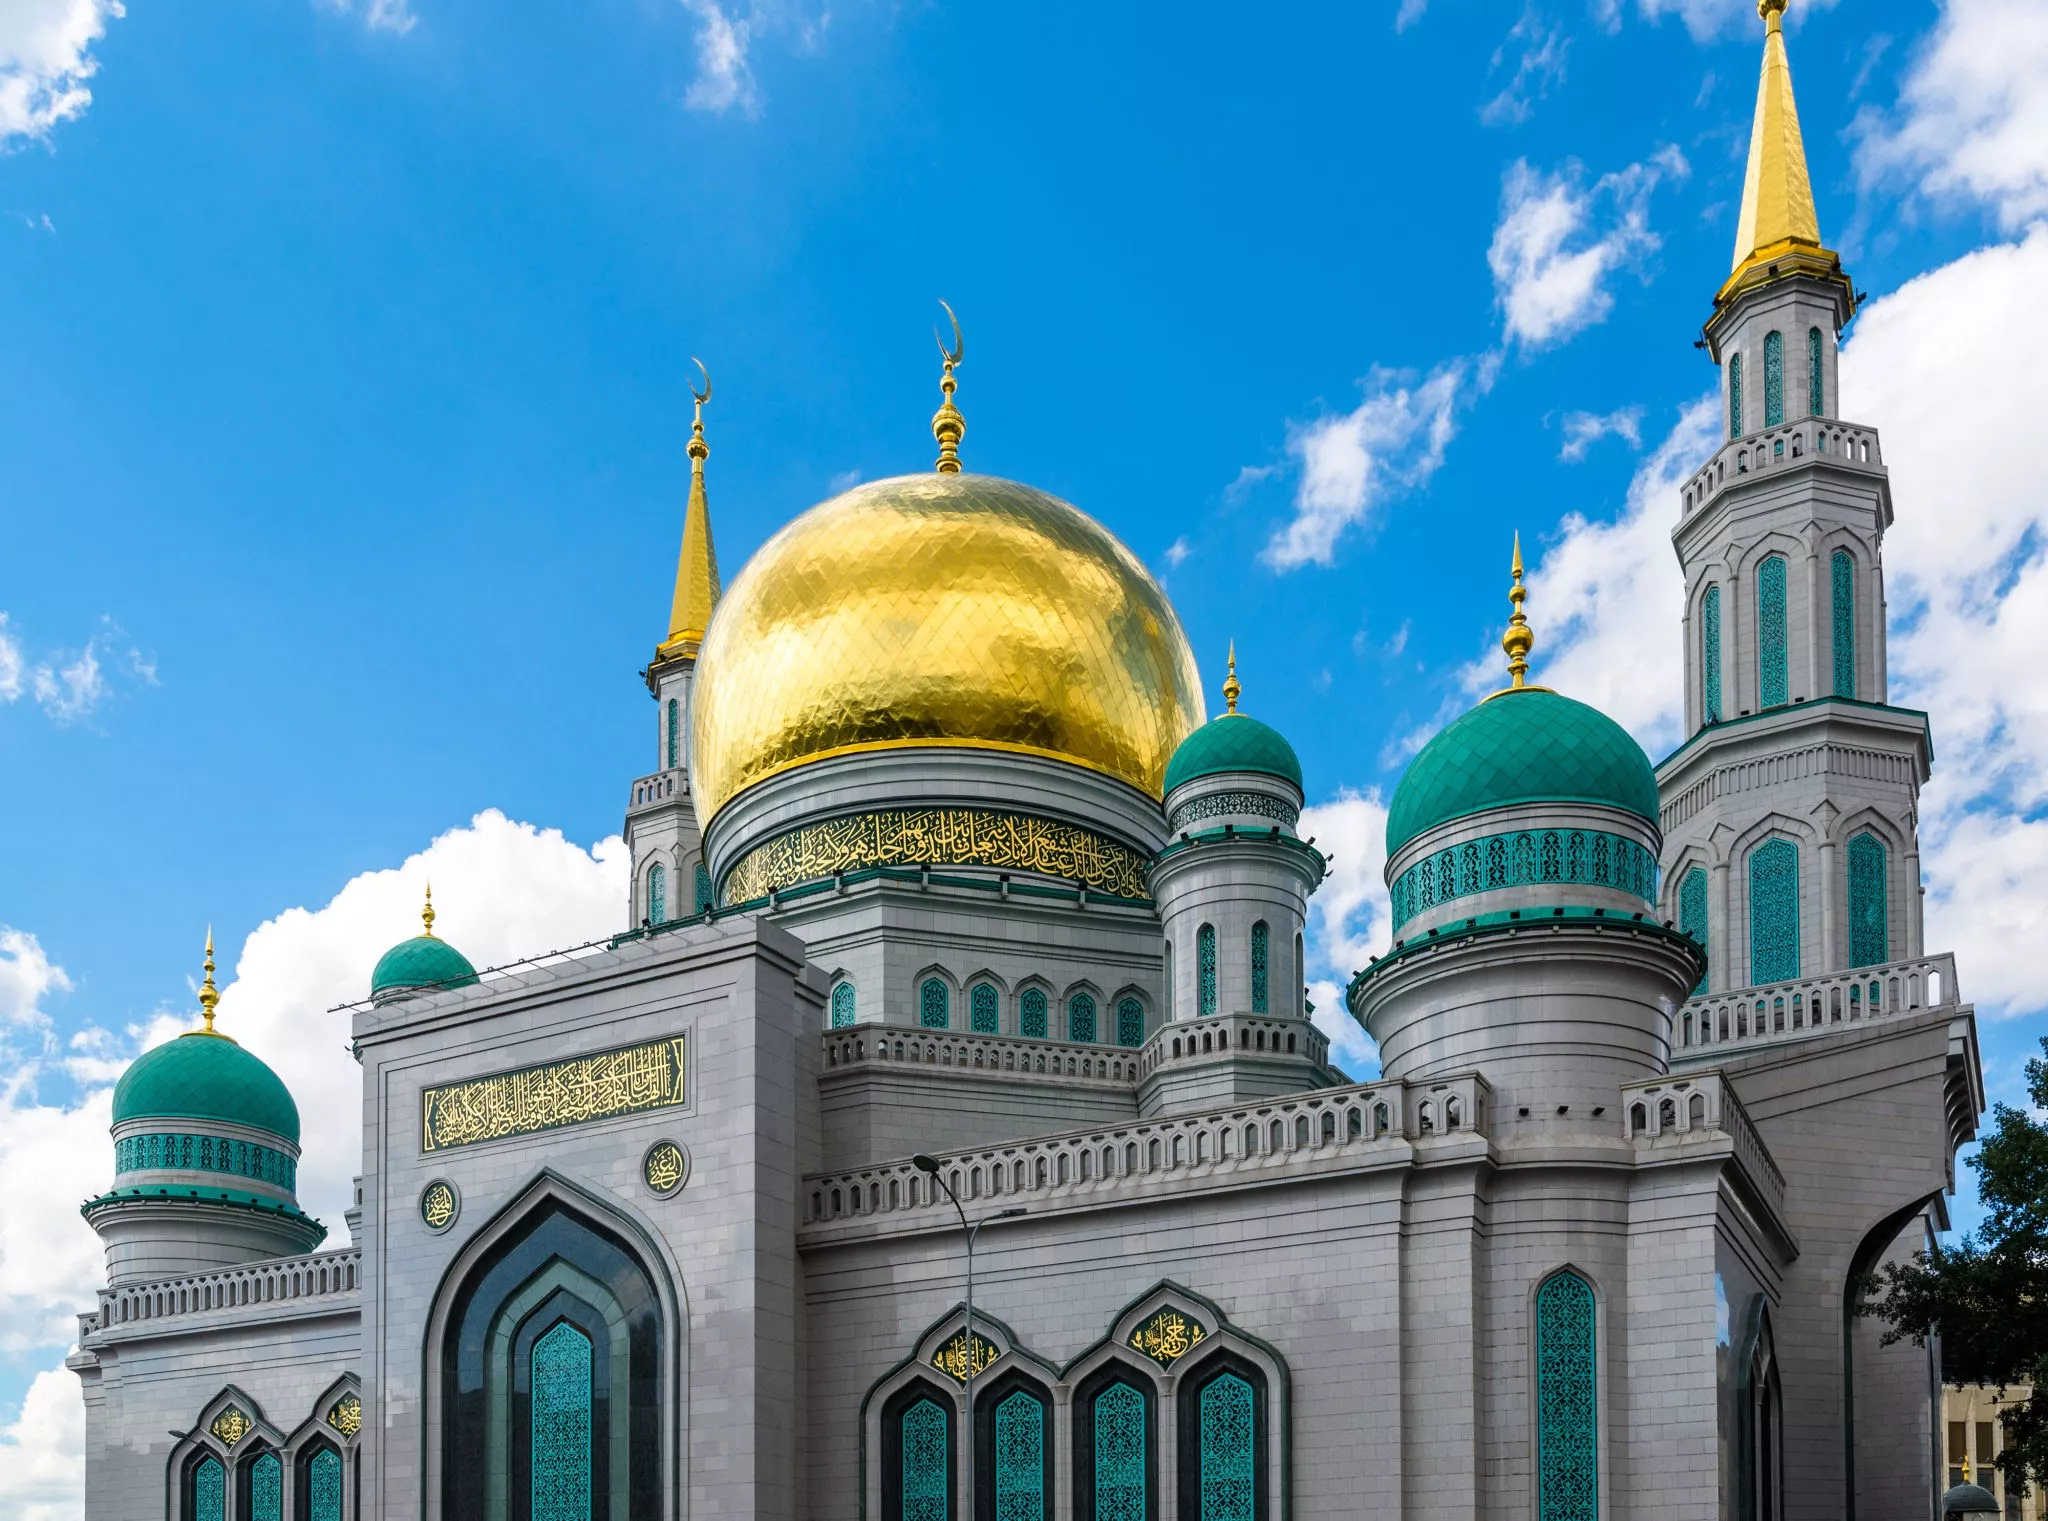 Moscow Cathedral Mosque in Russia, Europe | Architecture - Rated 4.1